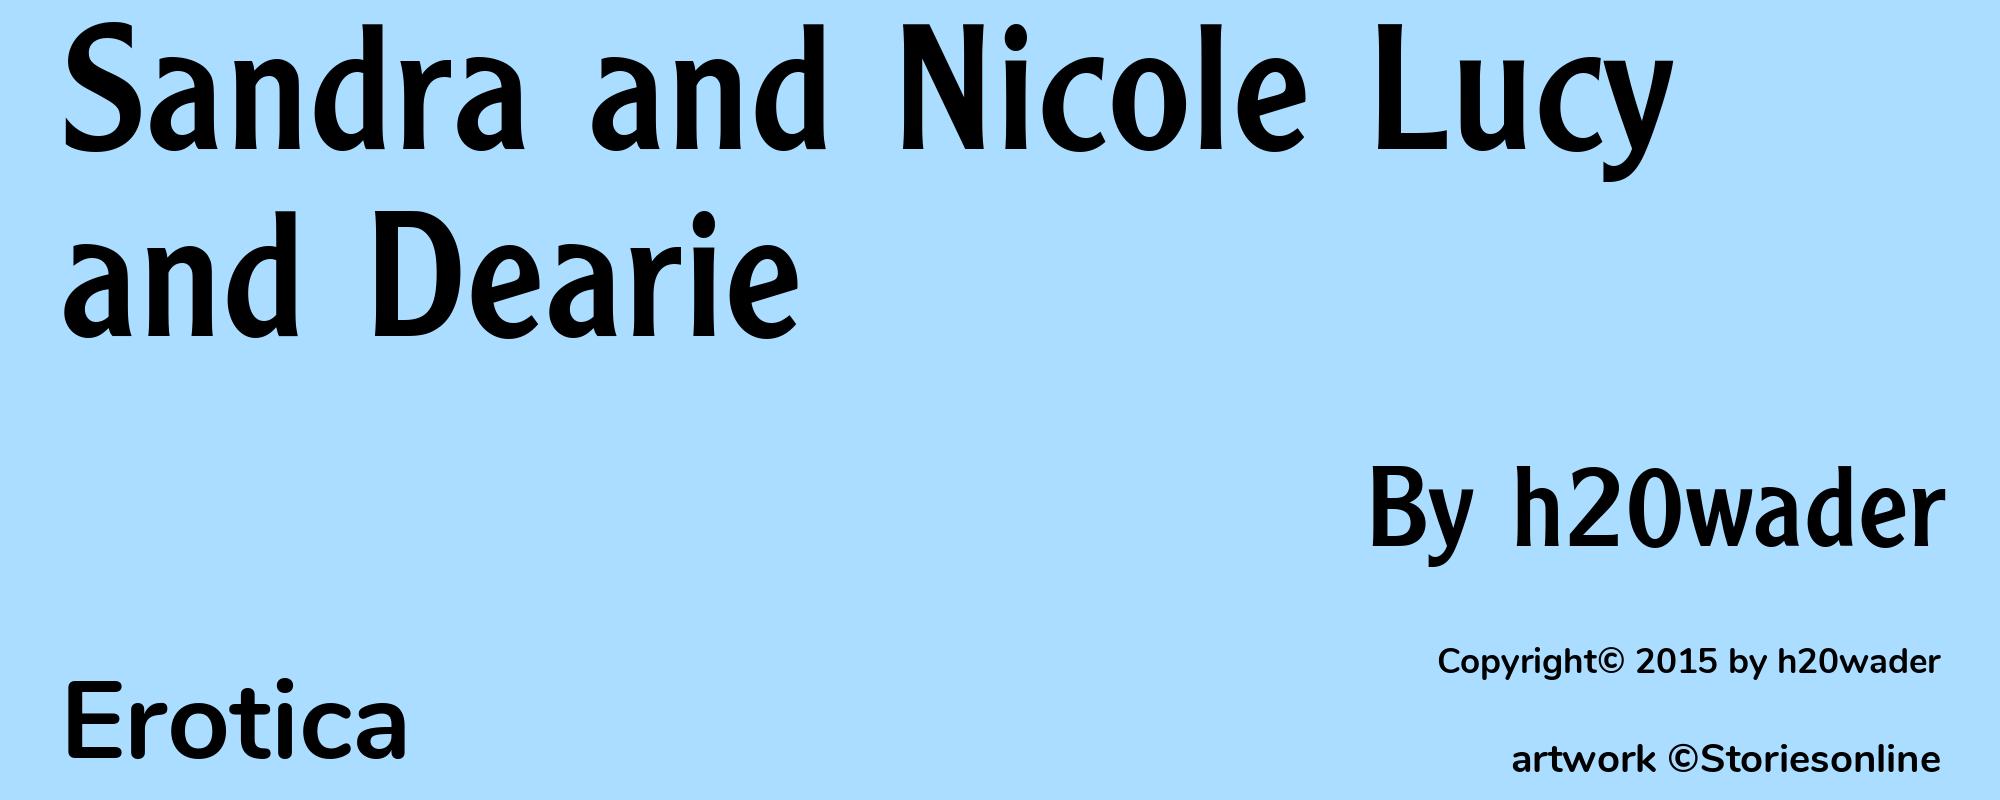 Sandra and Nicole Lucy and Dearie - Cover